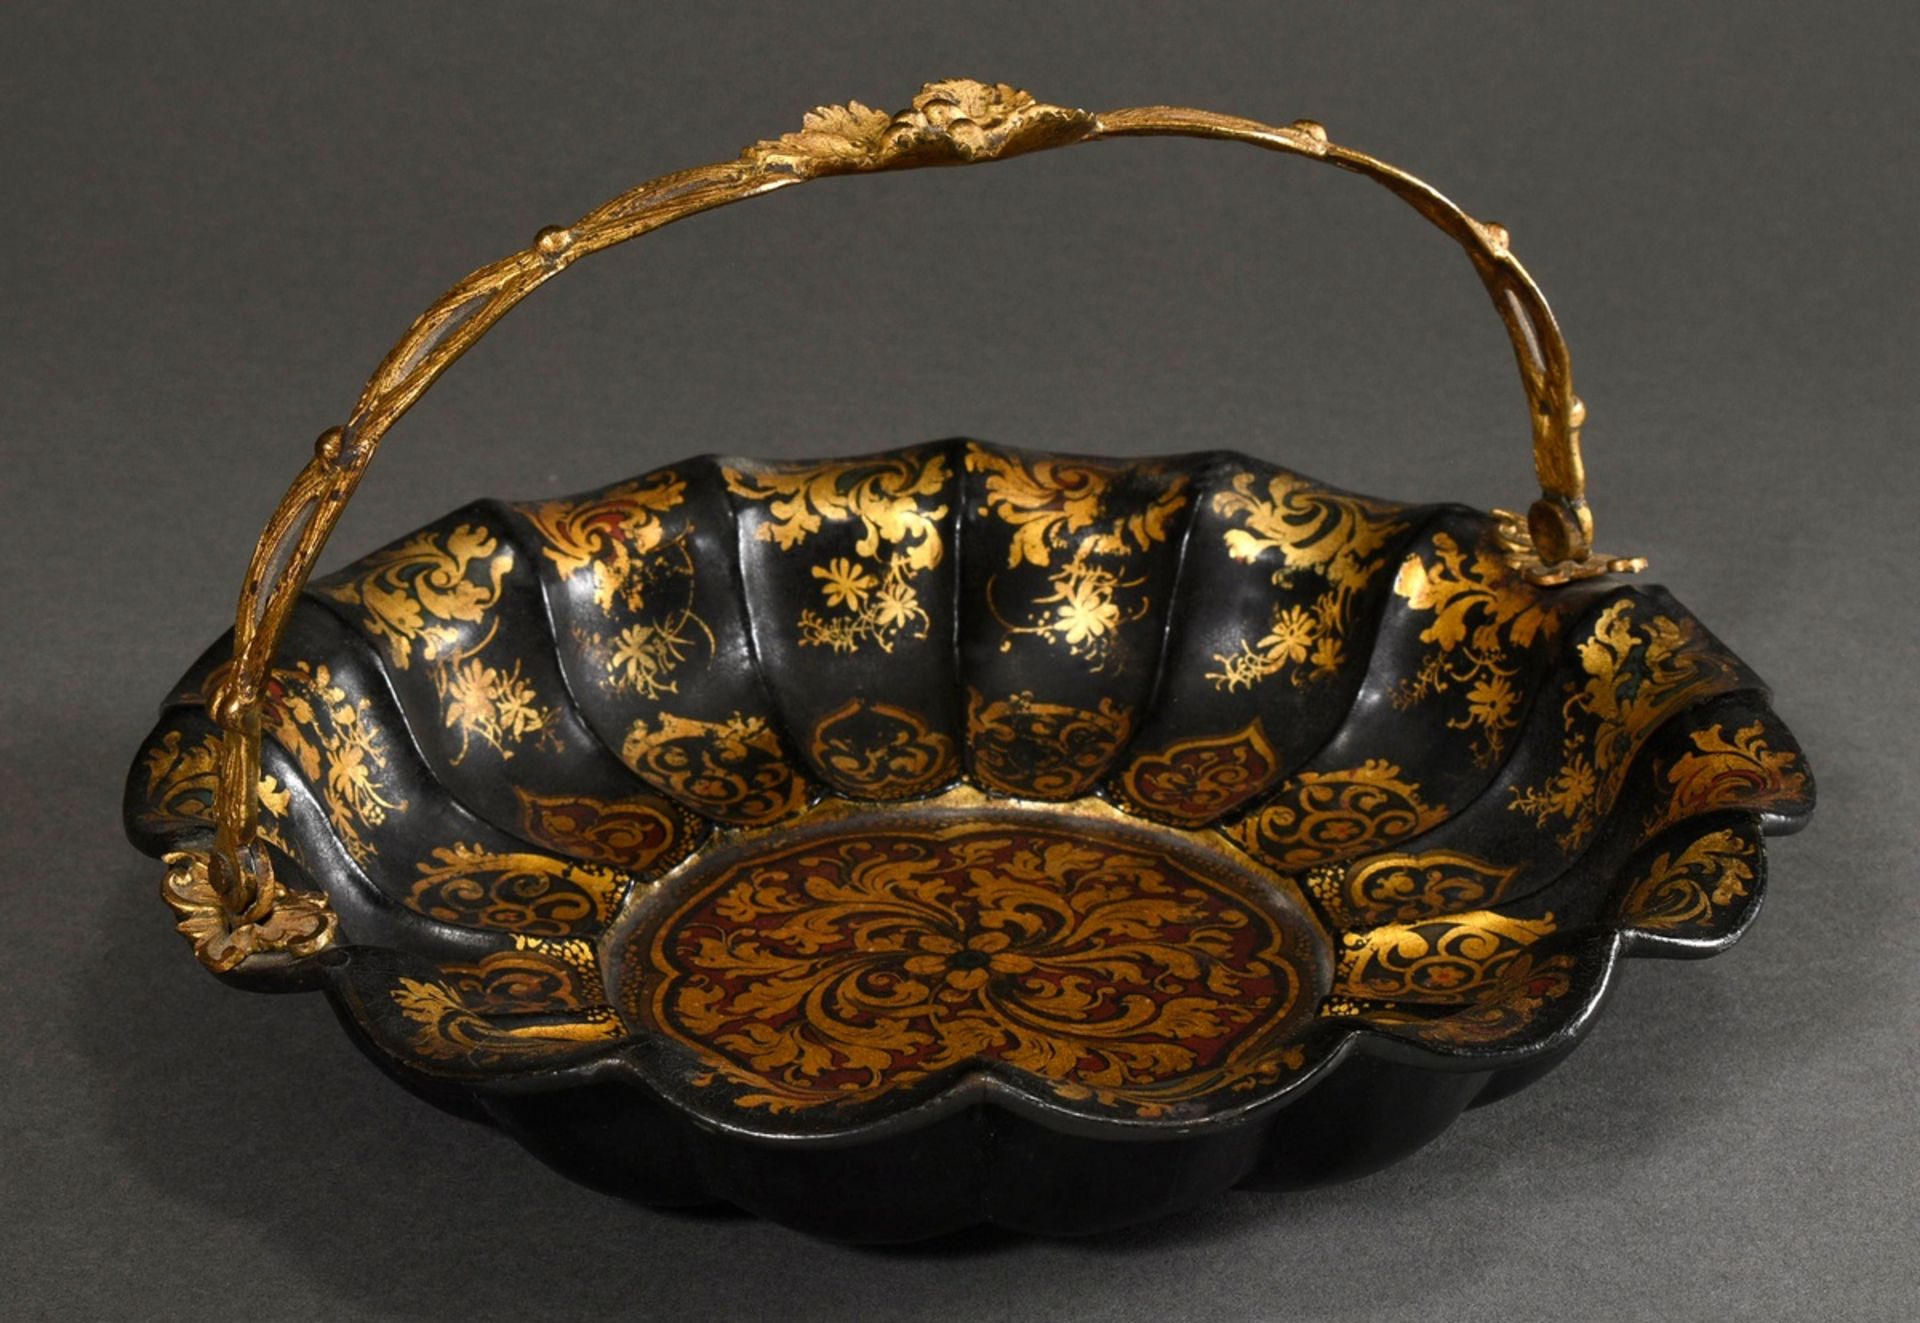 Flower-shaped papier-mâché bowl with a vegetal metal handle and floral gold painting on a red and g - Image 2 of 8